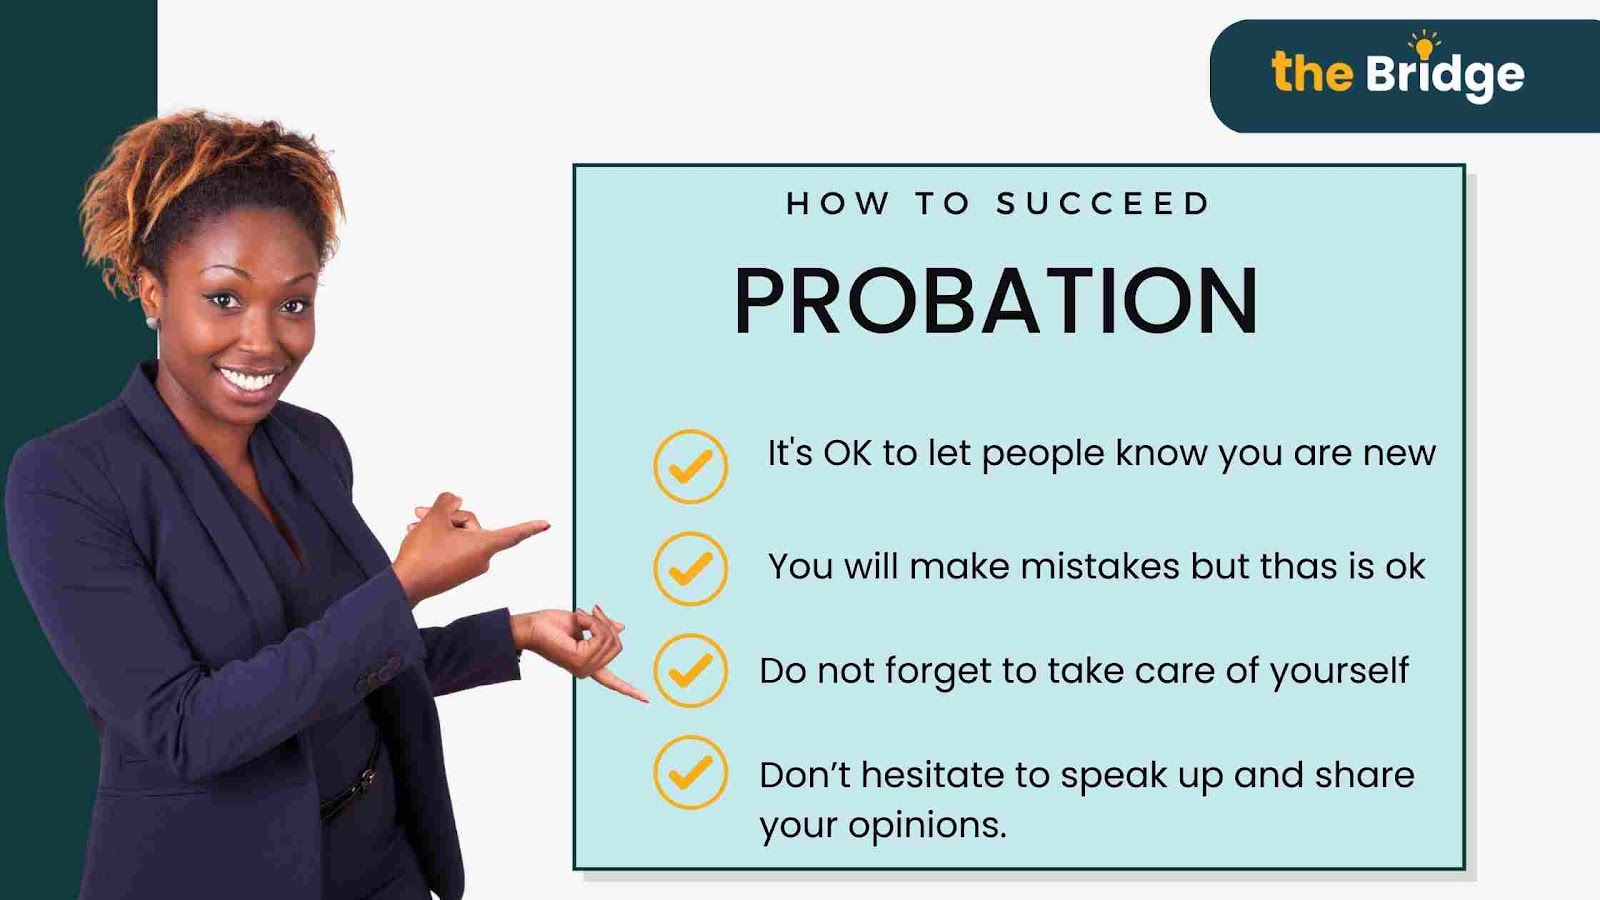 an illustration of tips to succeed probation Period by the Bridge Programme